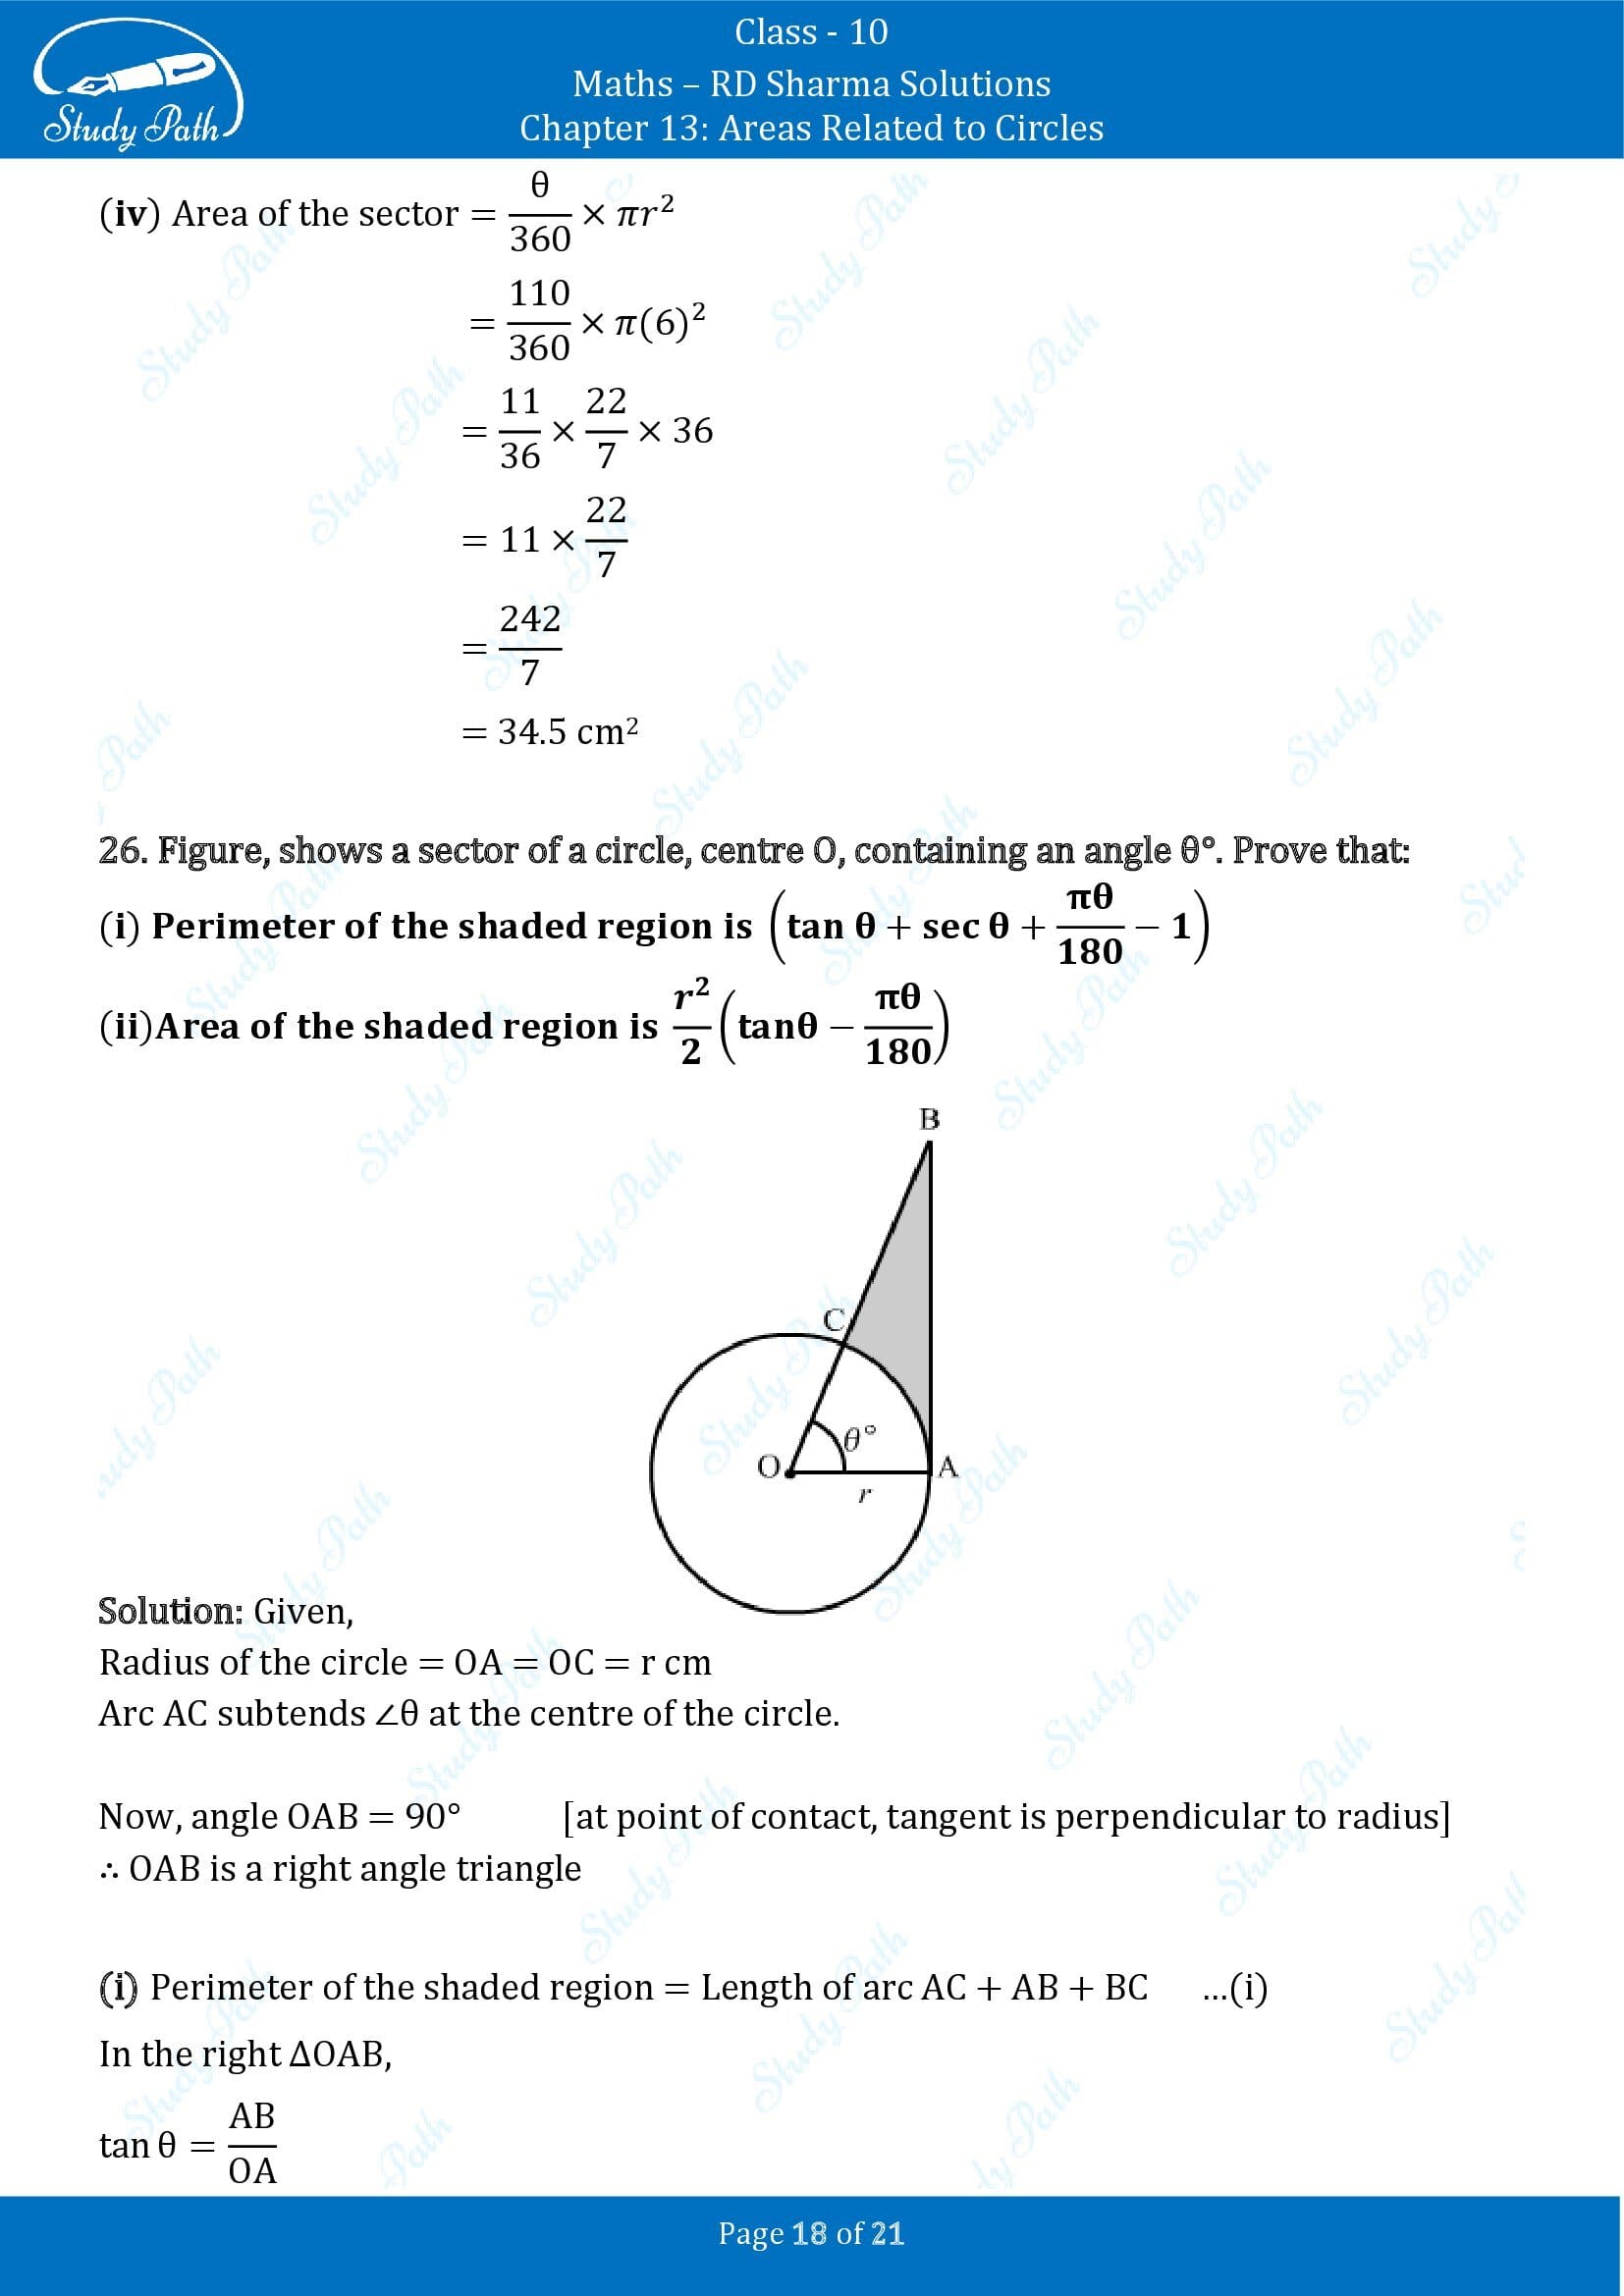 RD Sharma Solutions Class 10 Chapter 13 Areas Related to Circles Exercise 13.2 00018